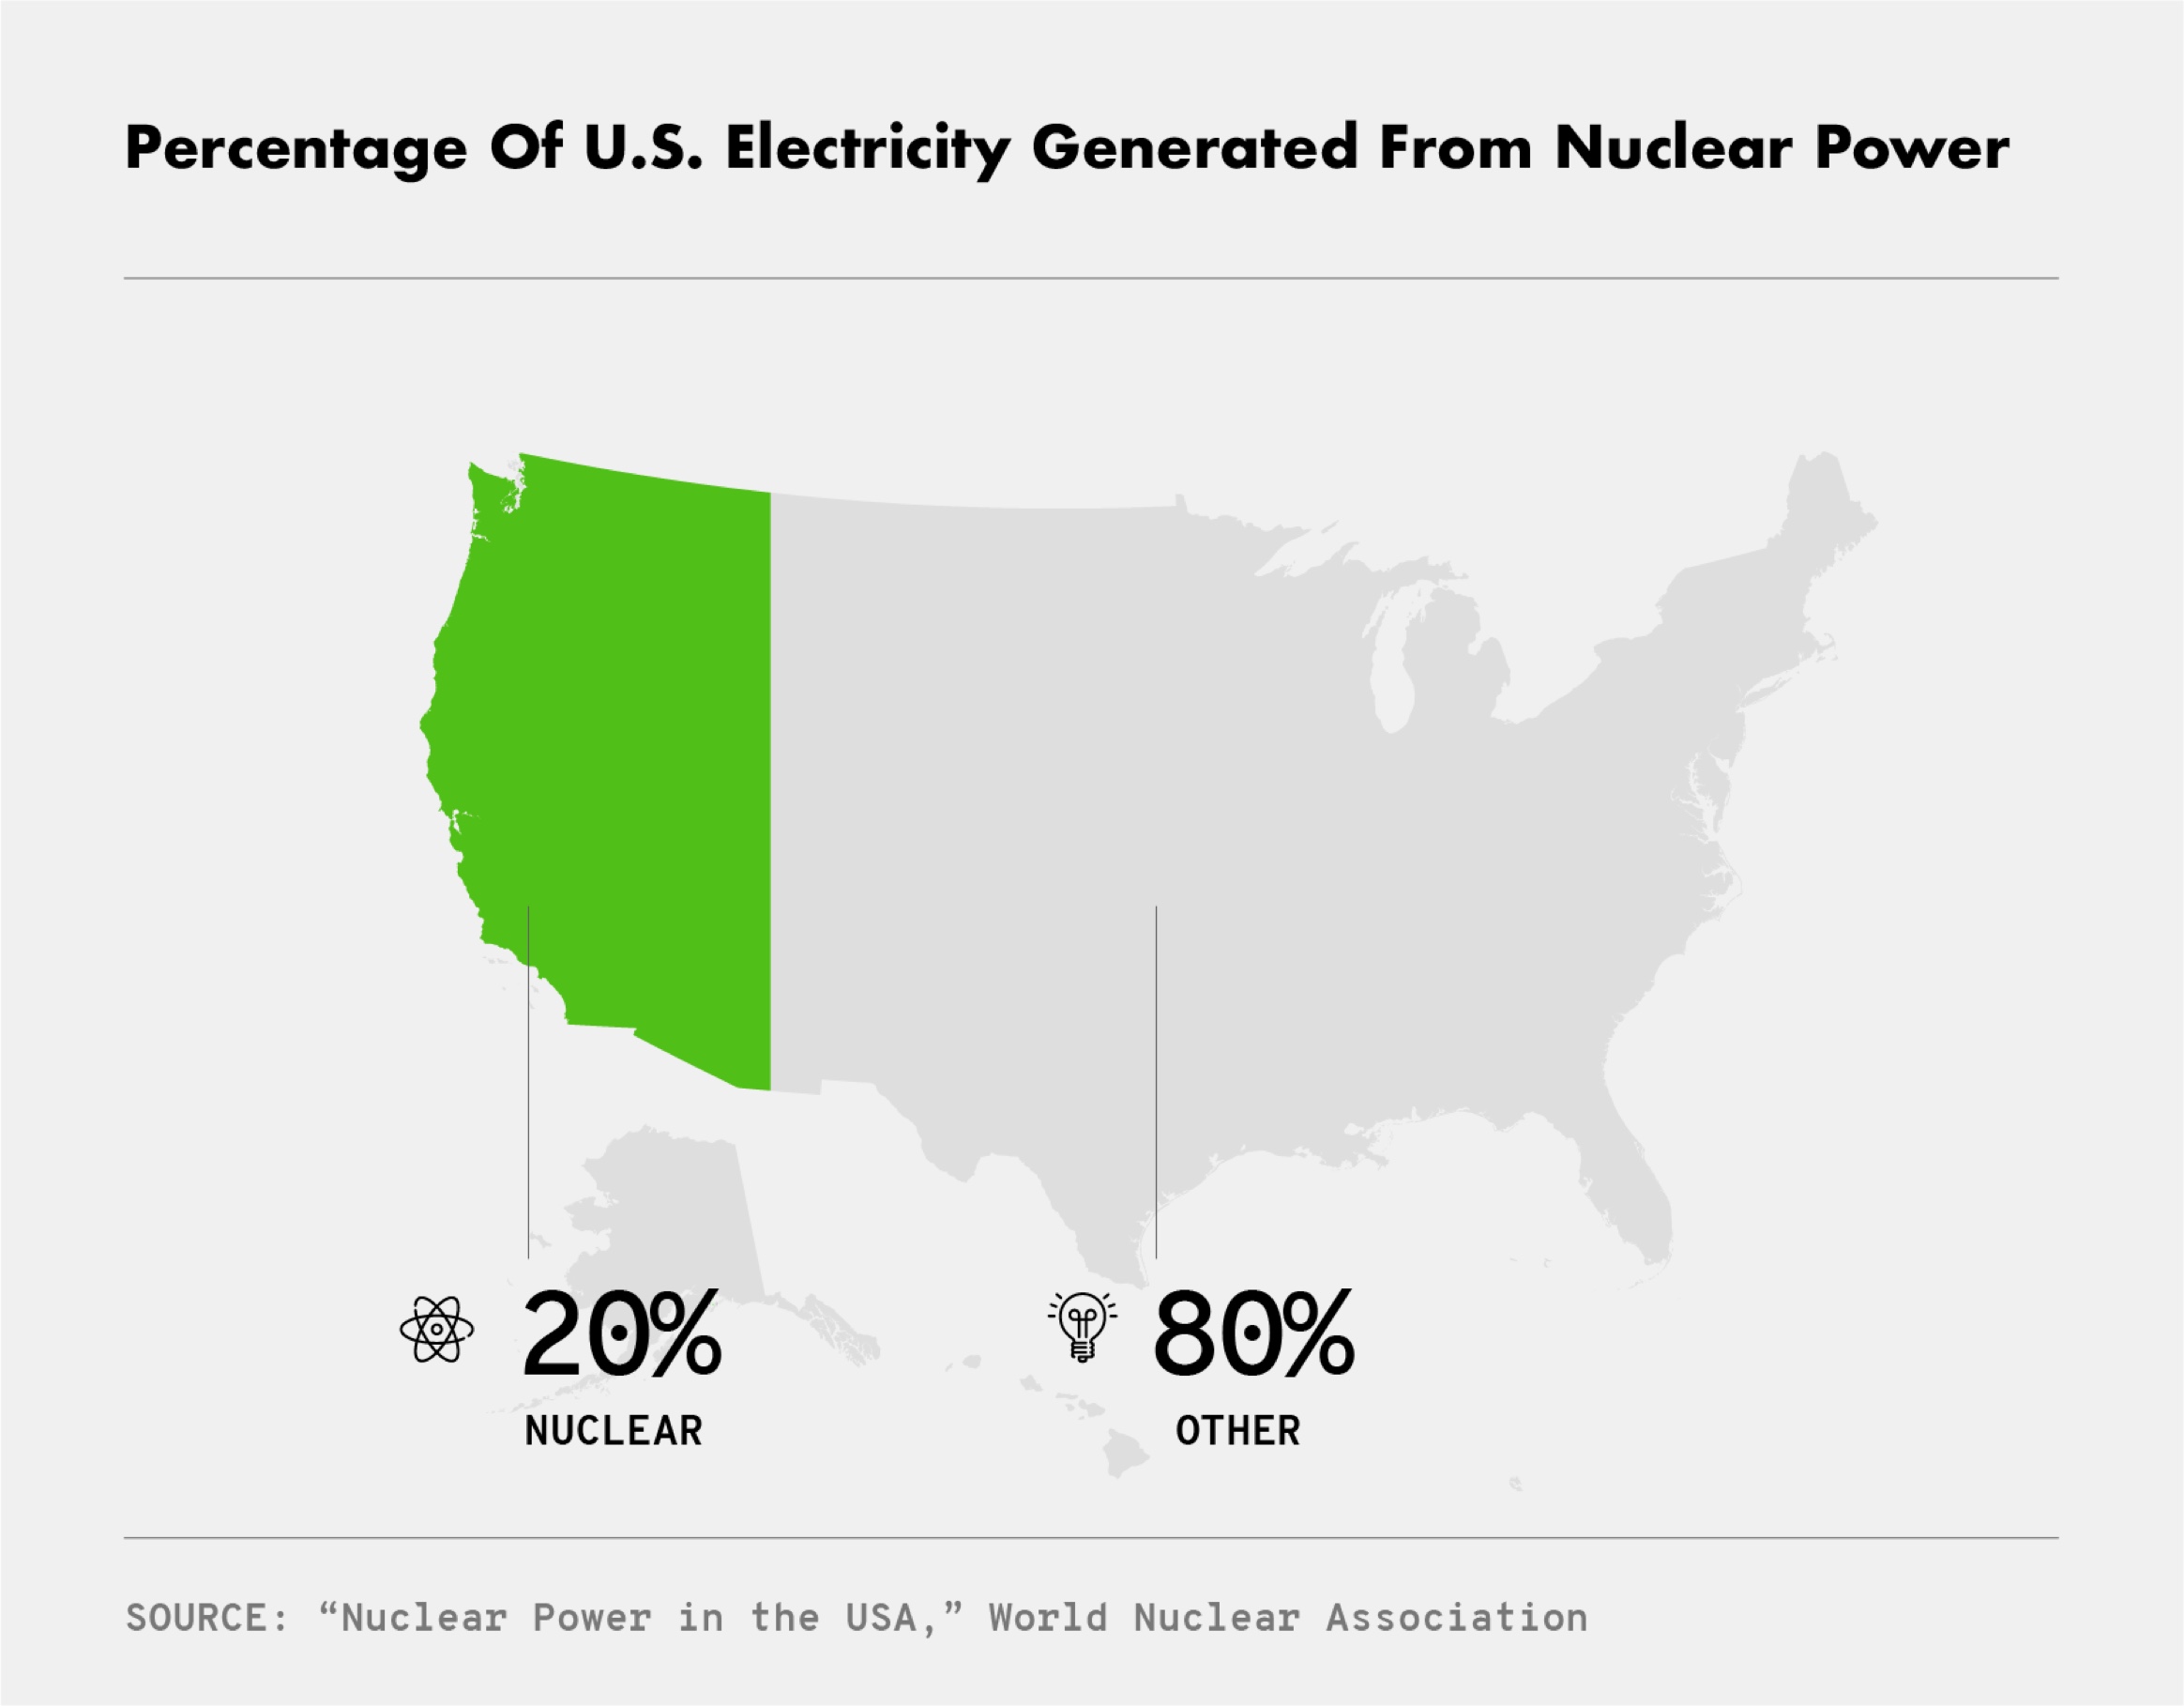 Percentage of U.S. Electricity Generated from Nuclear Power